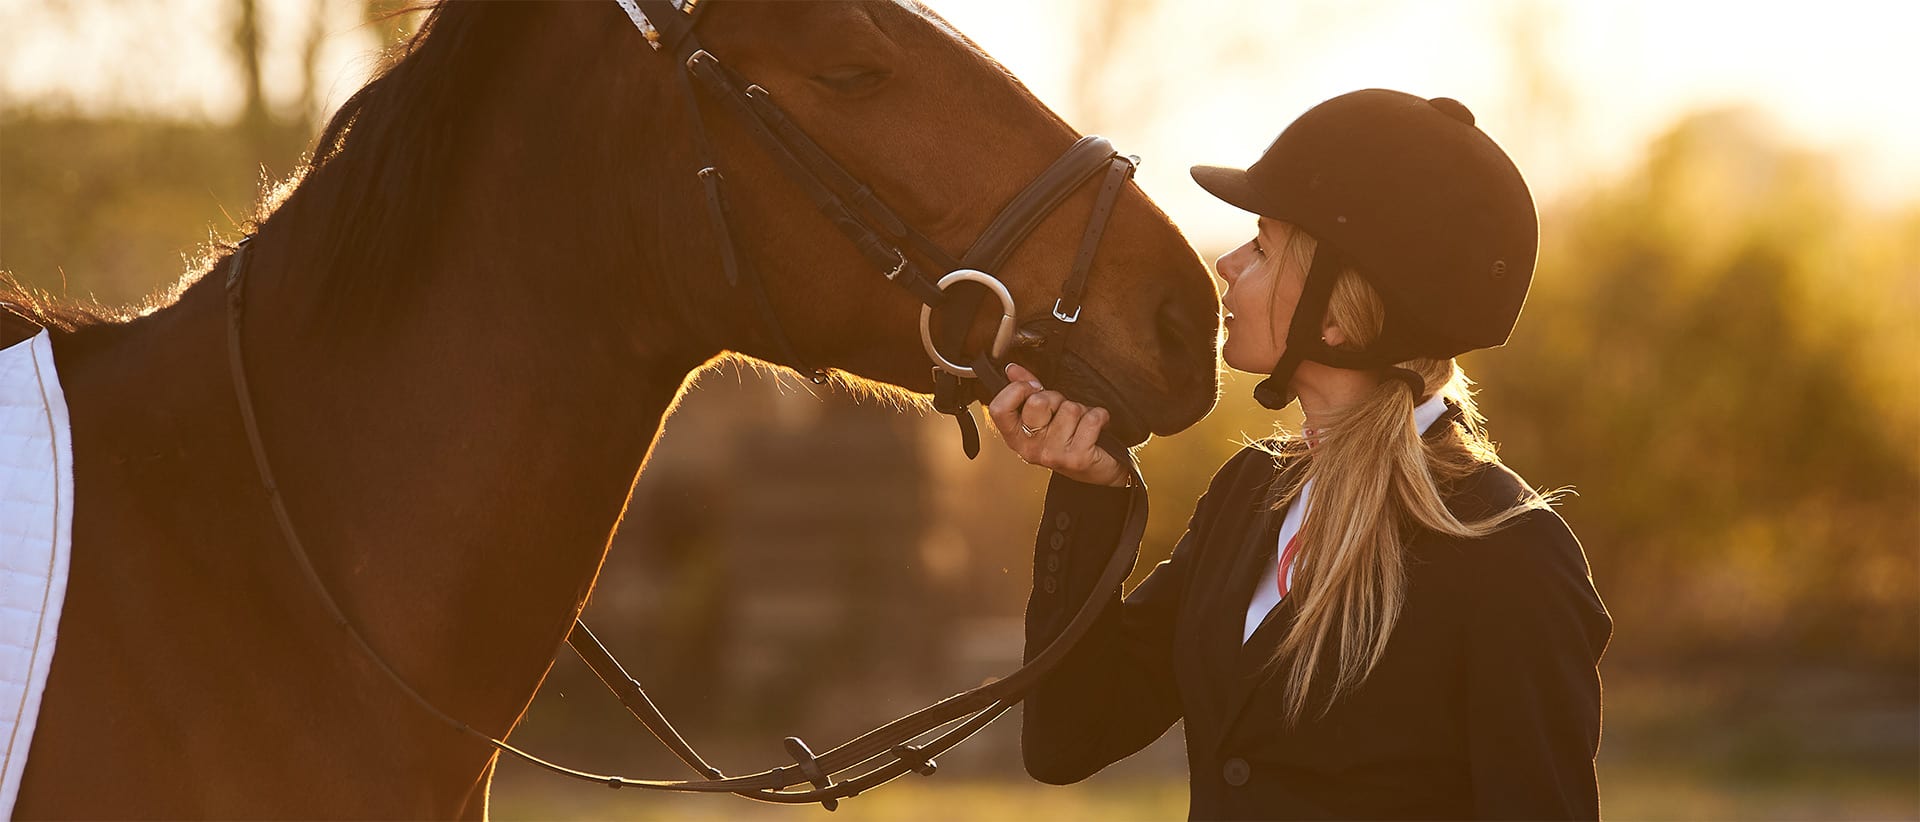 Blonde woman in riding helmet petting a brown horse's face